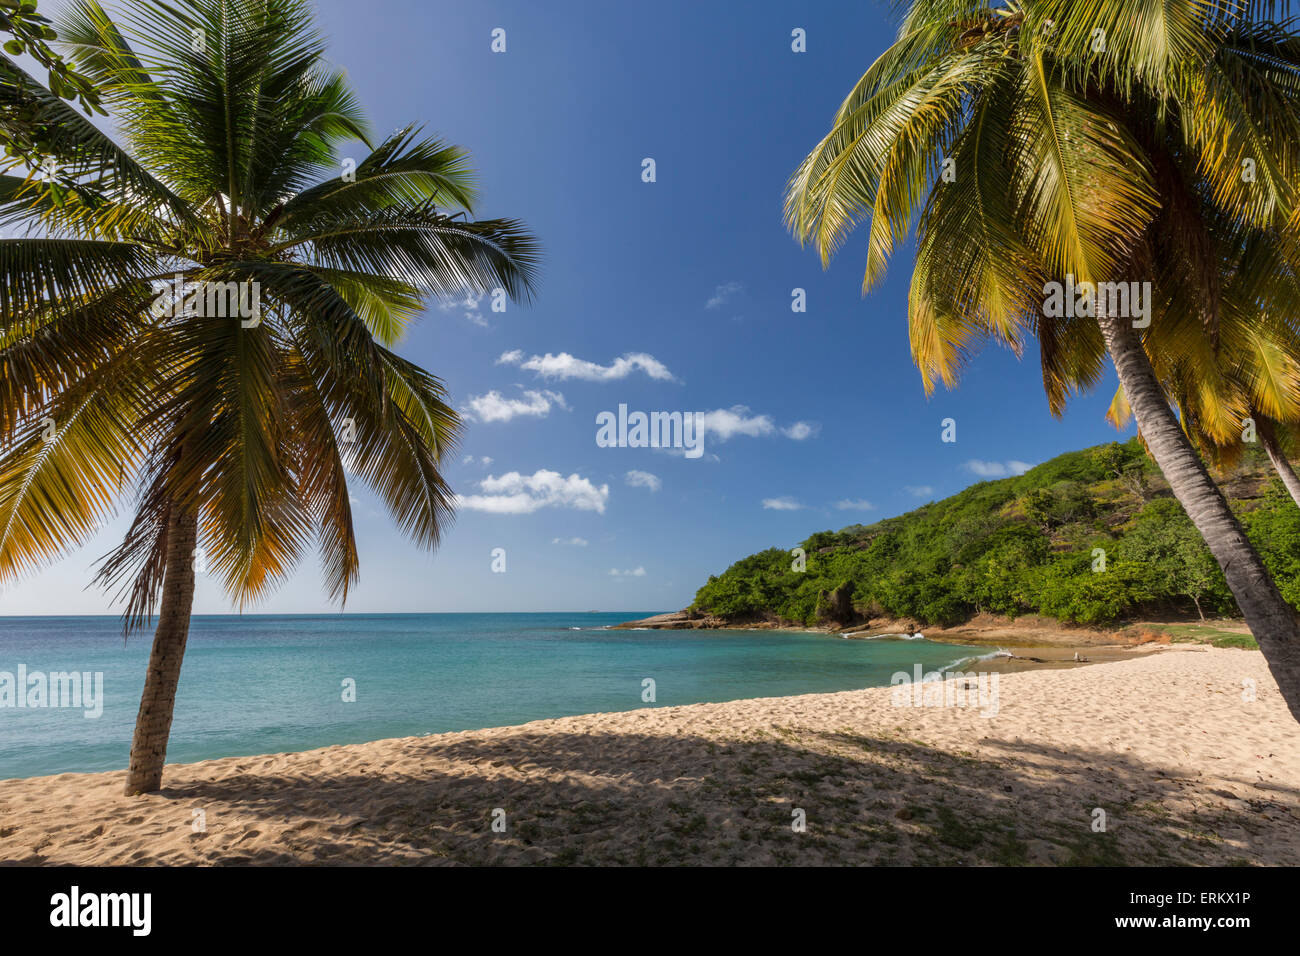 Palm trees thrive on the beautiful beach of Hawksbill which houses one of the most luxurious resorts in the Caribbean, Antigua Stock Photo